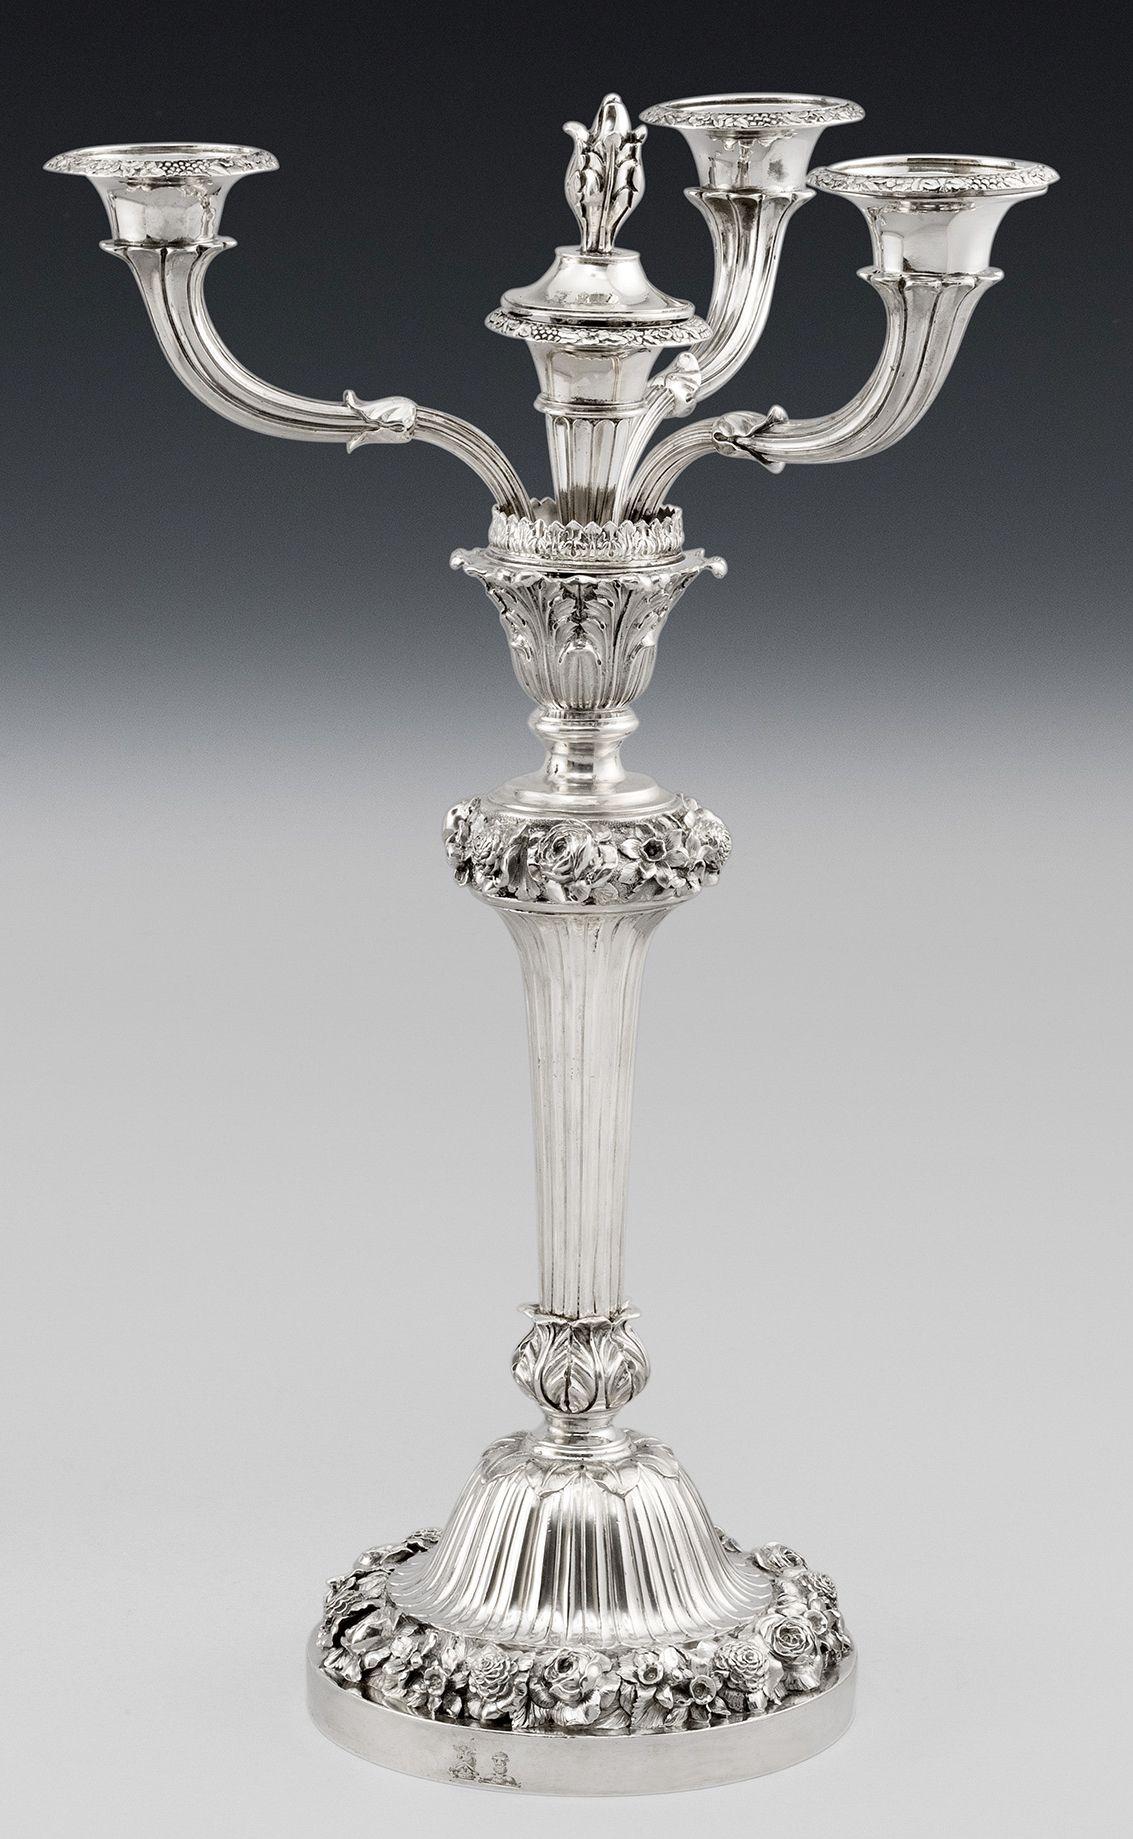 This important pair of George IV sterling silver candelabra are cast, have four lights and were made in London in 1825/26 by Benjamin Smith. The candelabra stand on a very unusual circular base decorated with a very crisp band of flower heads,